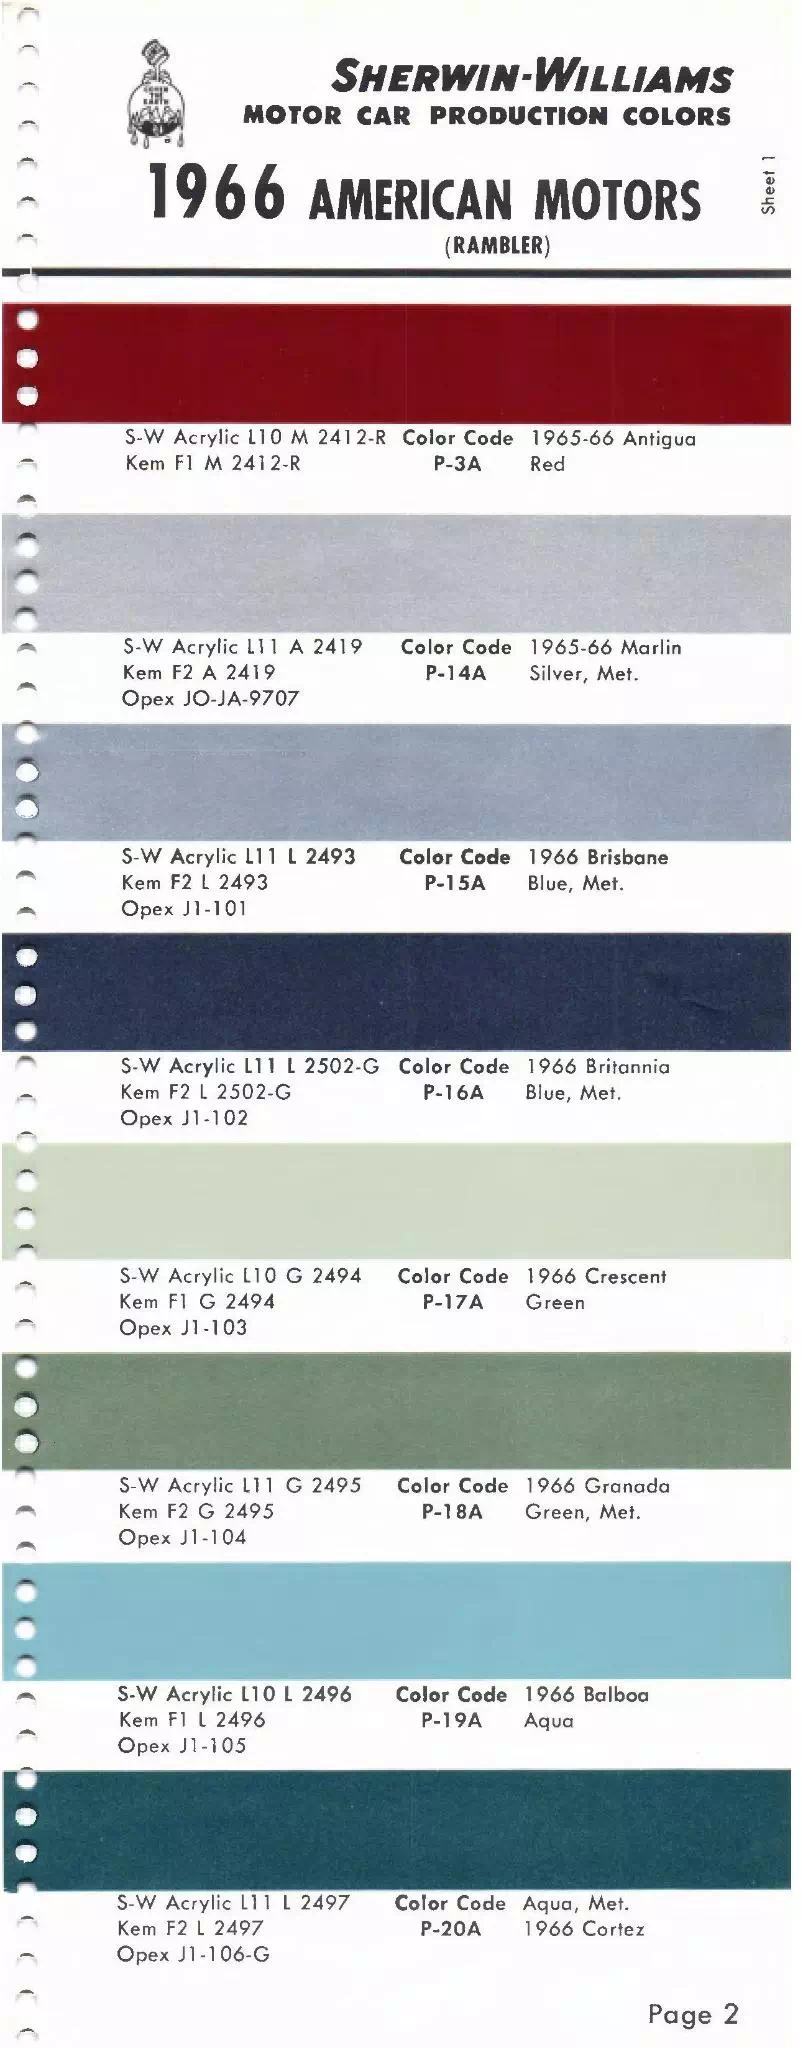 Paint Colors and Paint Codes Used on AMC Vehicles